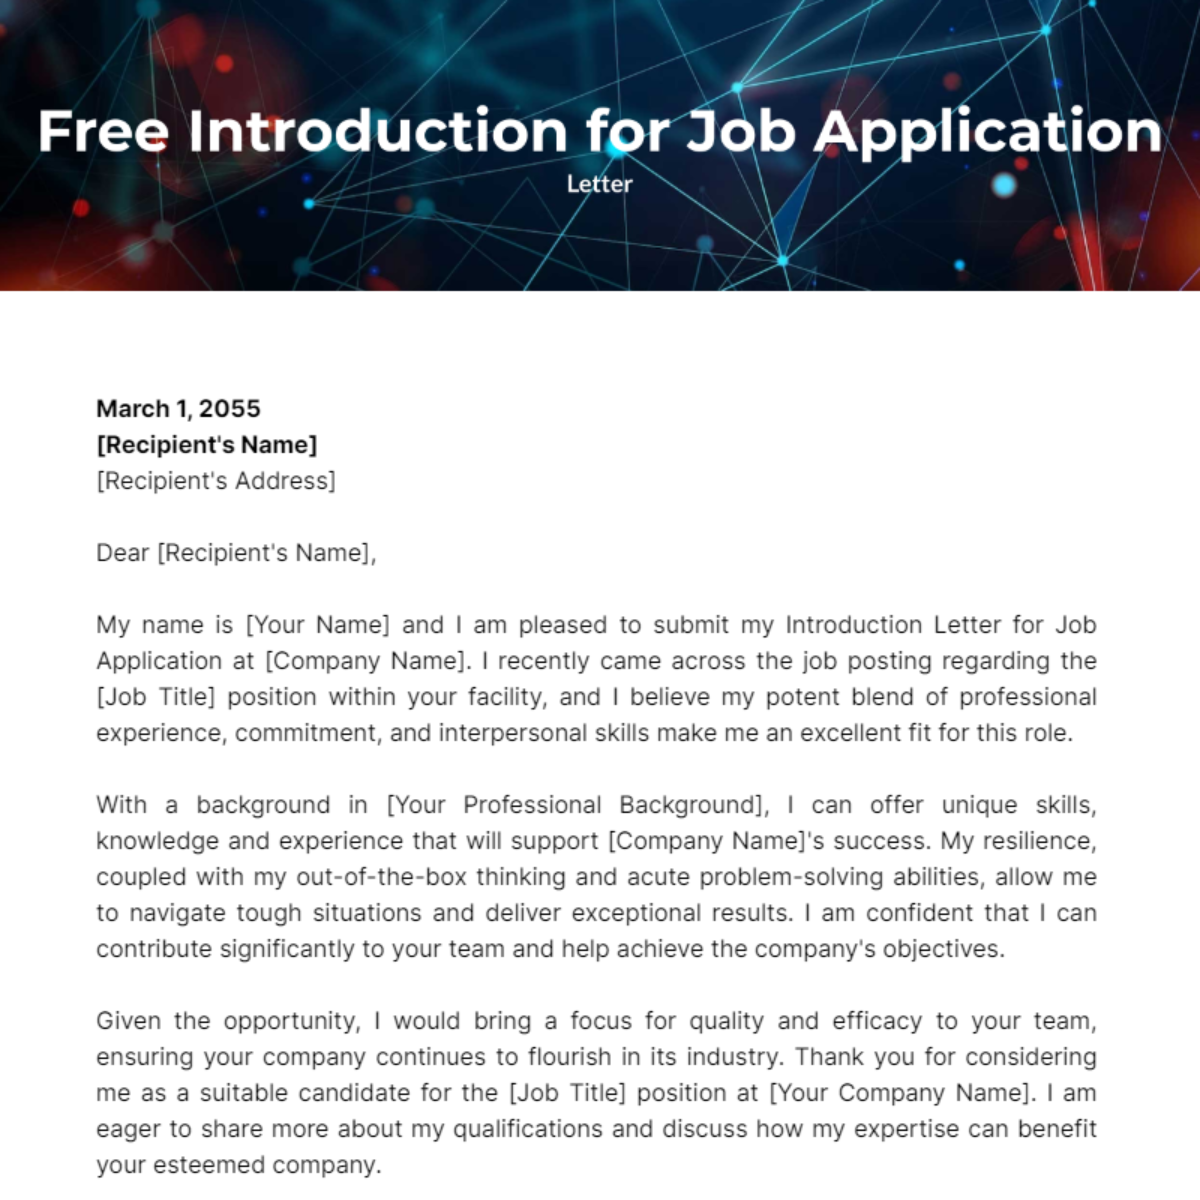 Introduction Letter for Job Application Template